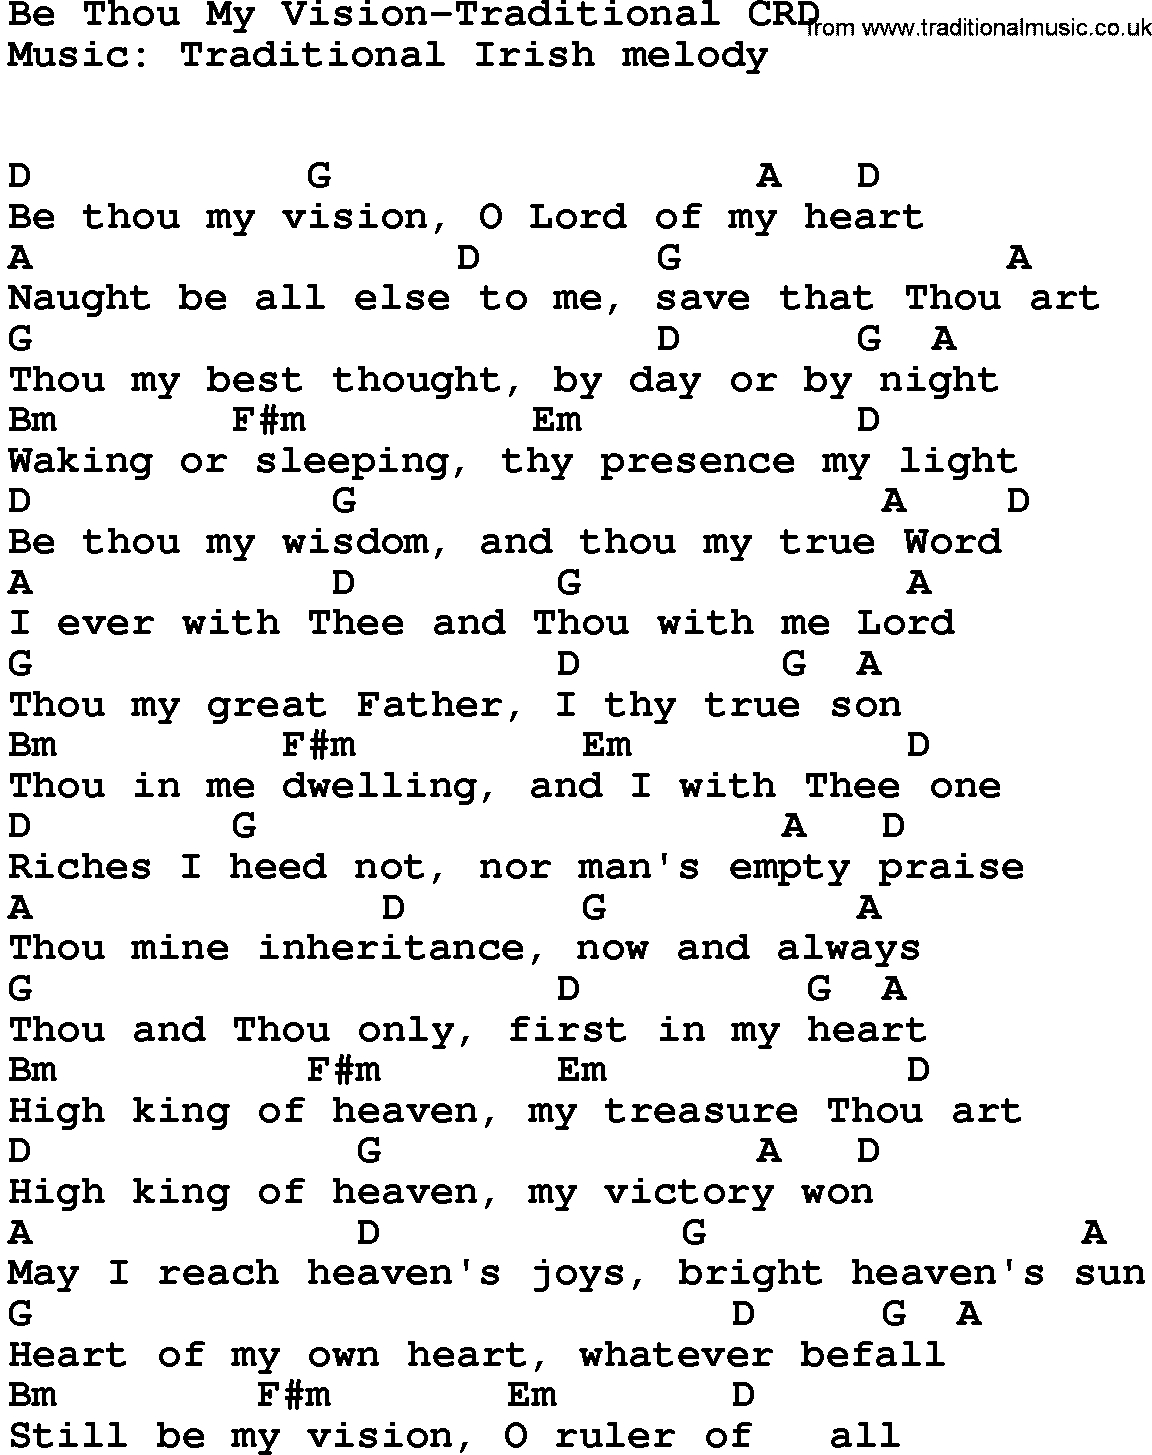 Be Thou My Vision Chords Gospel Song Be Thou My Vision Traditional Lyrics And Chords